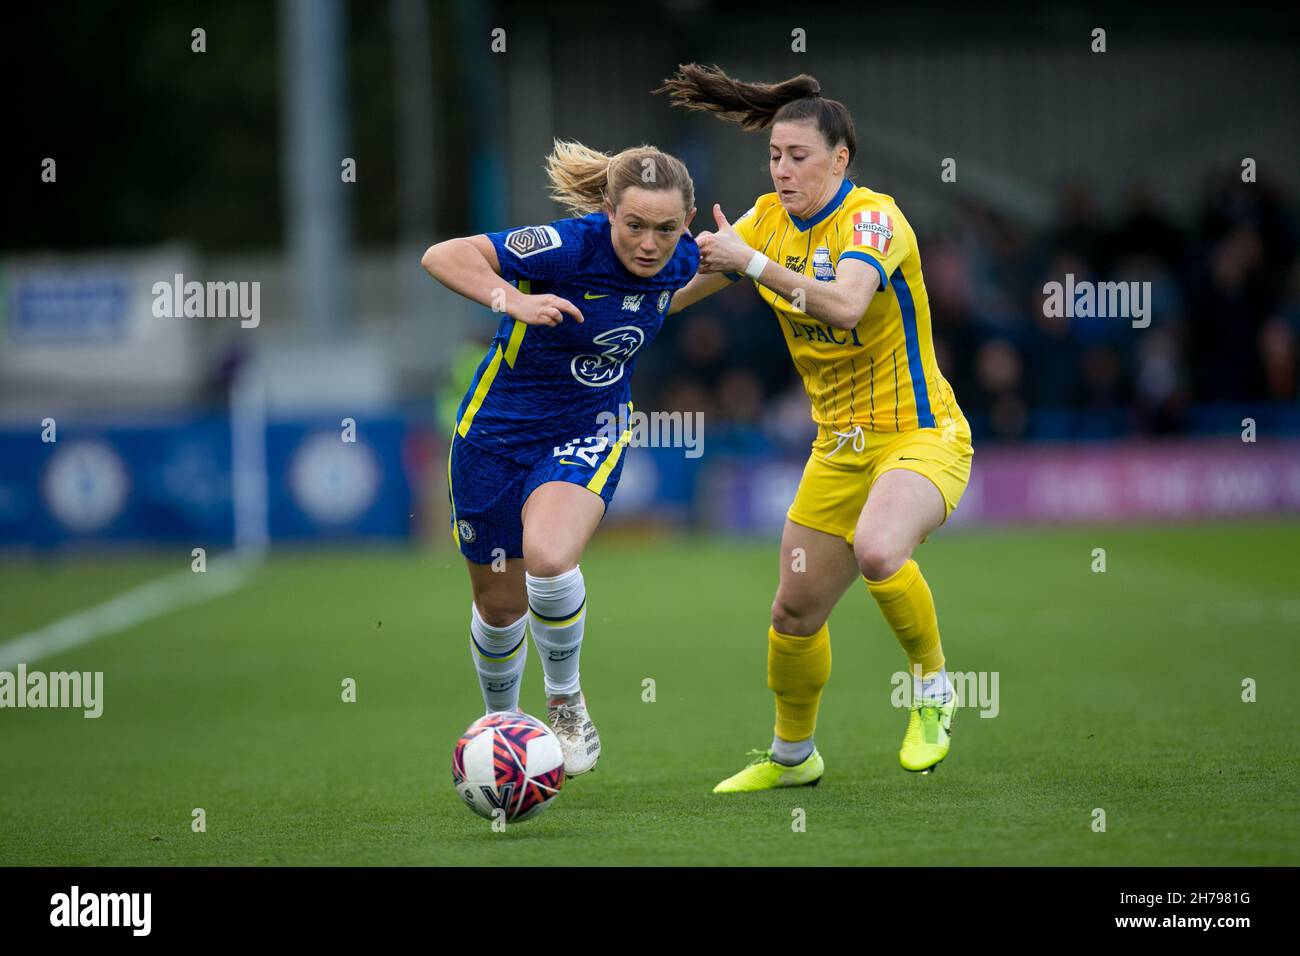 London, UK. 21st Nov, 2021. LONDON, UK. NOVEMBER 21ST : Erin Cuthbert of Chelsea FC and Louise Quinn of Birmingham City battle for the ball during the 2021-22 FA Womens Superleague fixture between Chelsea FC and Birmingham City at Kingsmeadow. Credit: Federico Guerra Morán/Alamy Live News Stock Photo